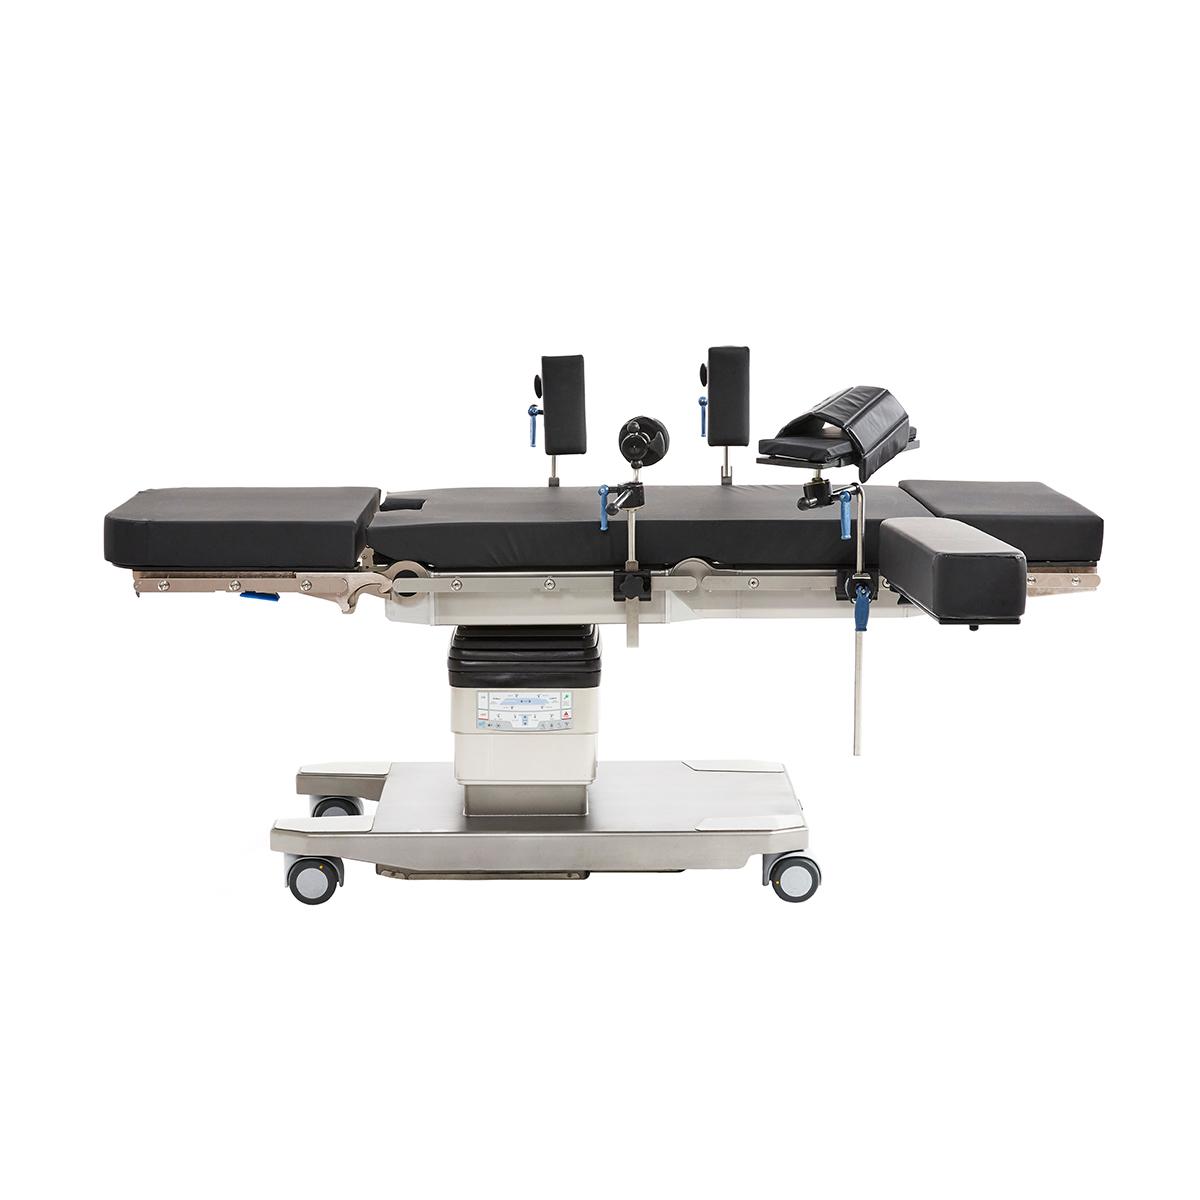 Hillrom™ surgical table equipped with Lateral Positioning accessories.